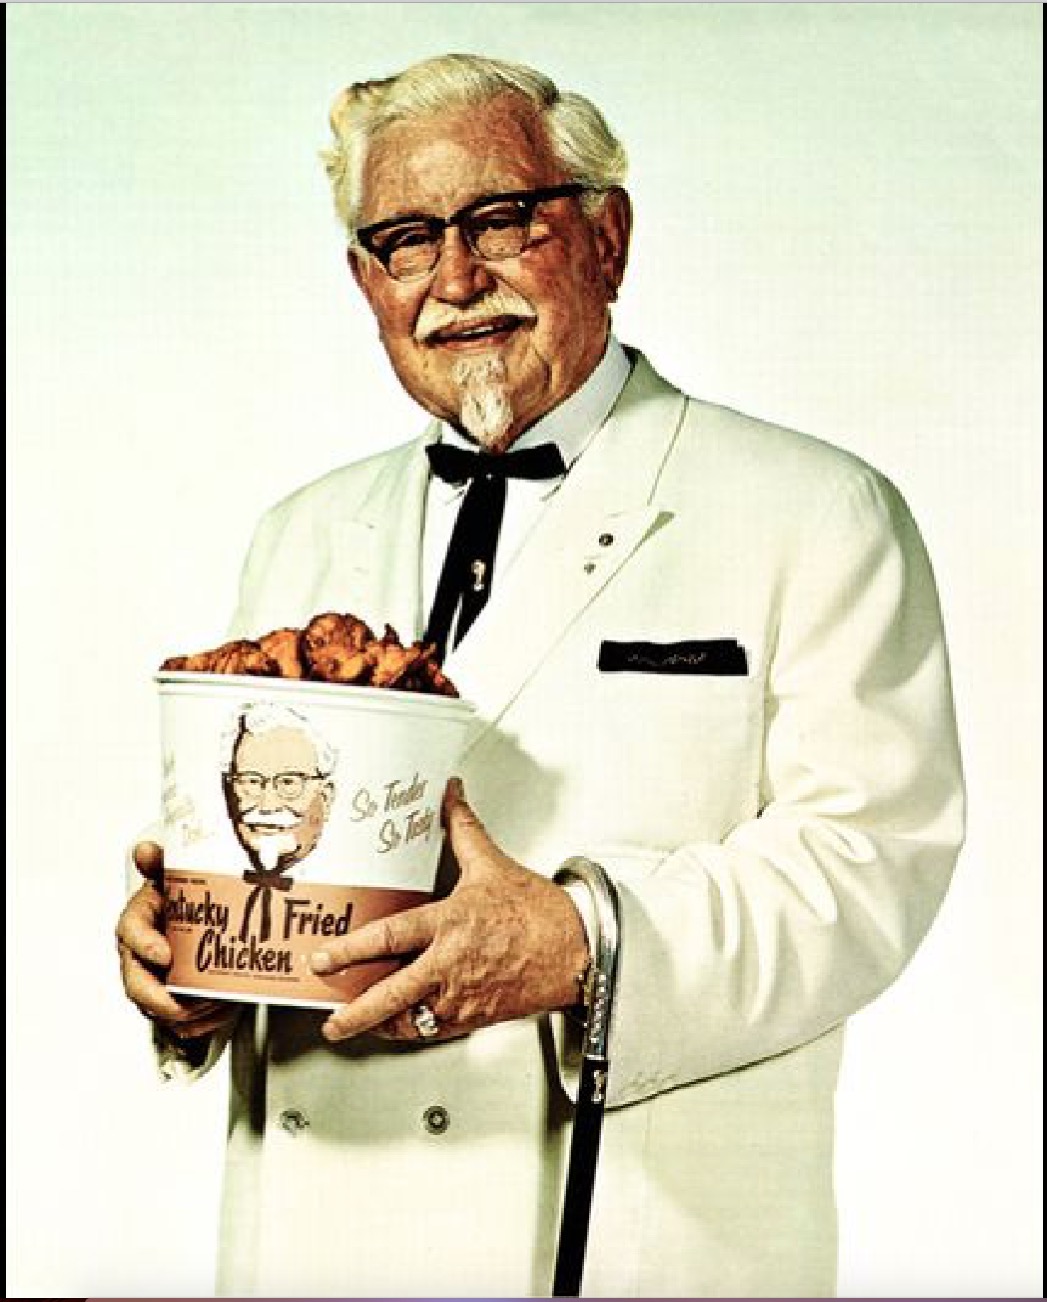 TV's Top Commercial Pitchmen: From Colonel Sanders to Mr. Whipple